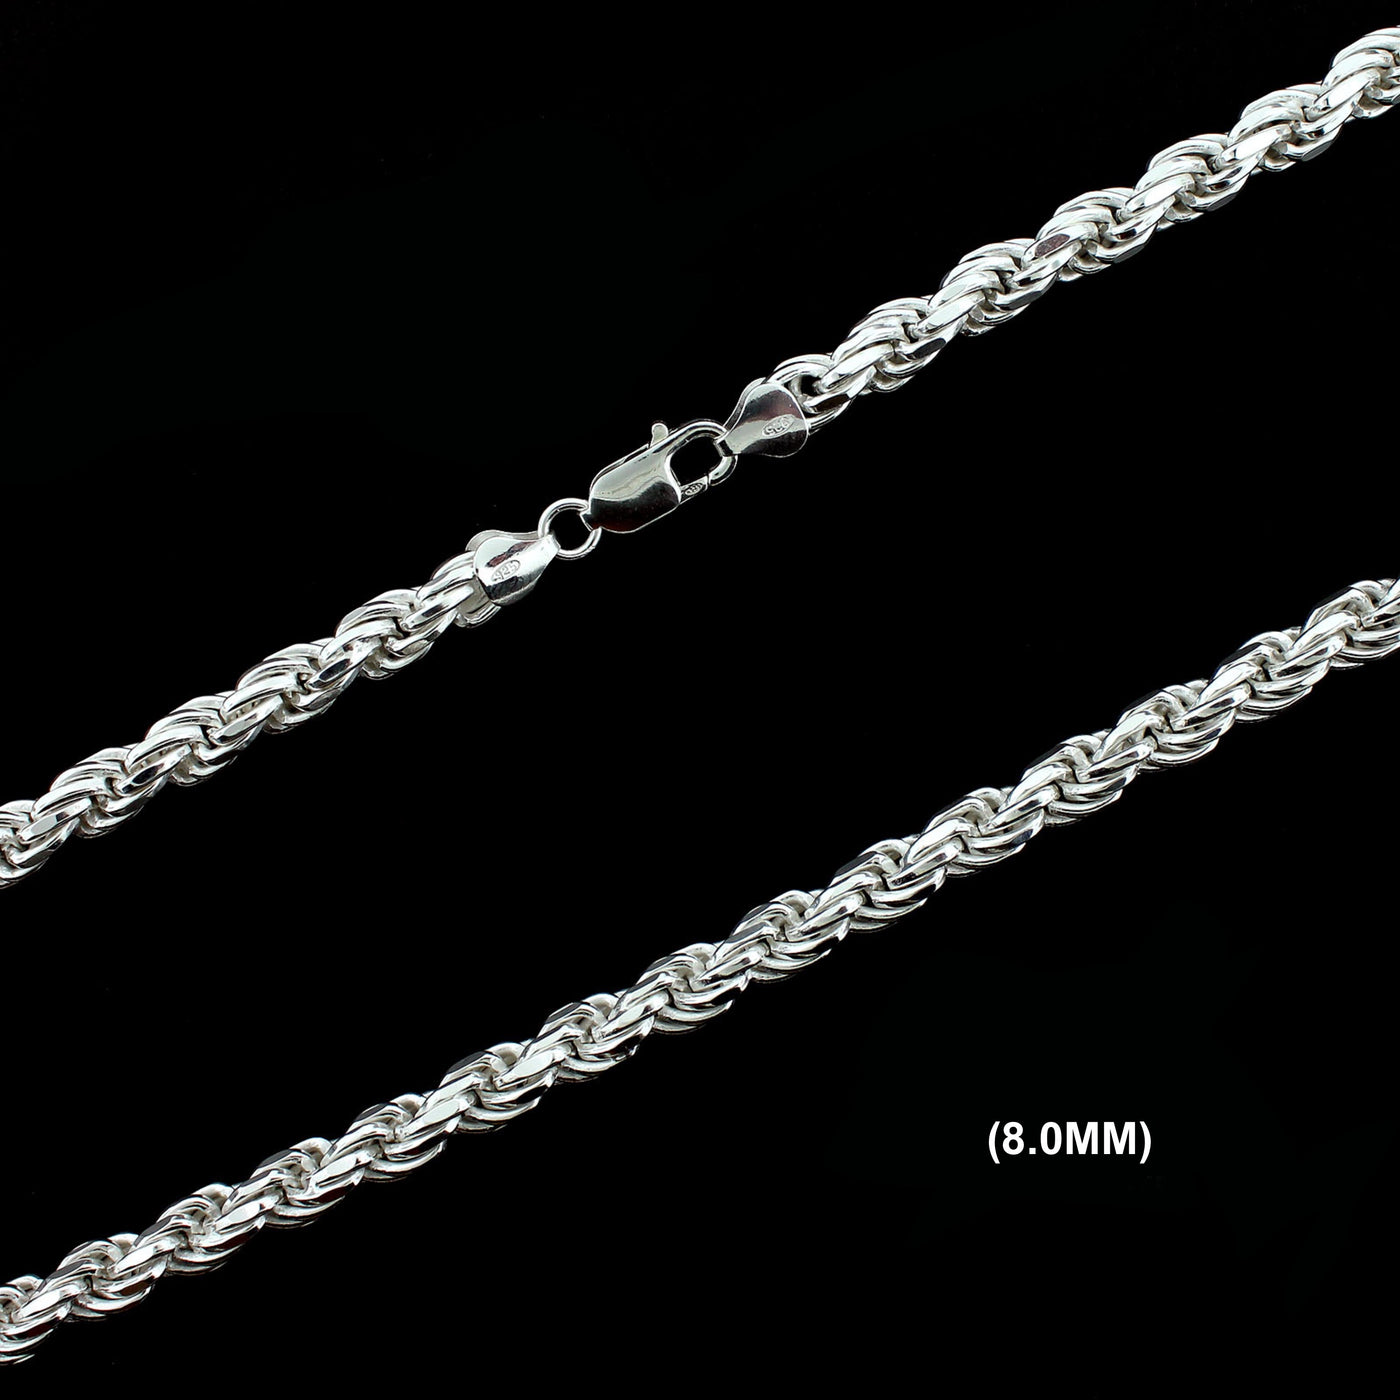 8MM Solid 925 Sterling Silver Diamond-Cut Rope Chain Necklace or Bracelet ITALY